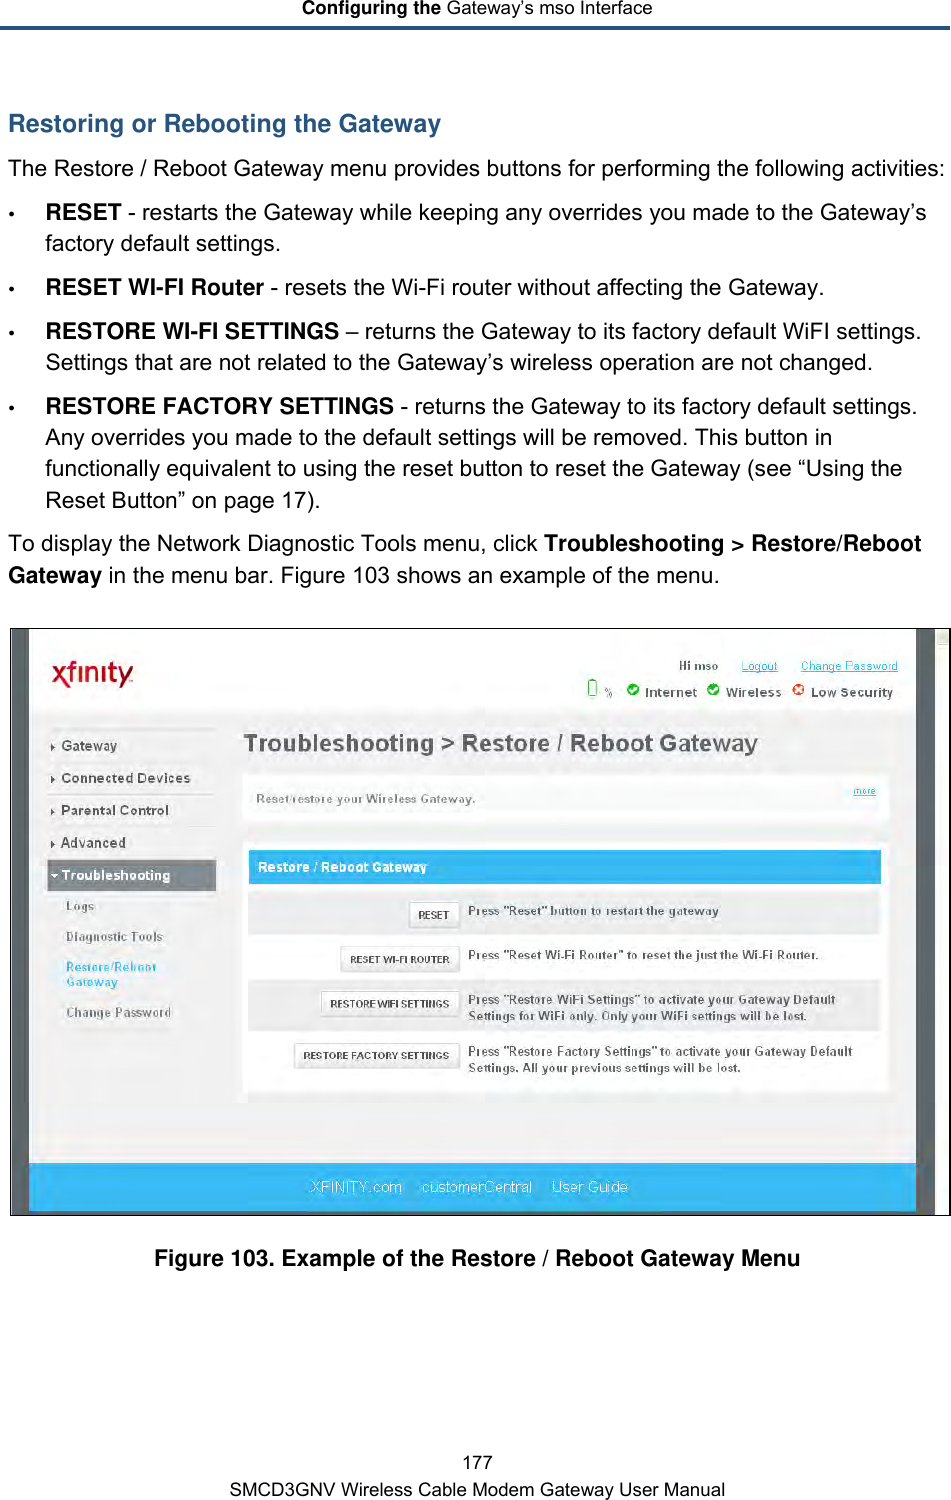 Configuring the Gateway’s mso Interface 177 SMCD3GNV Wireless Cable Modem Gateway User Manual Restoring or Rebooting the Gateway The Restore / Reboot Gateway menu provides buttons for performing the following activities:  RESET - restarts the Gateway while keeping any overrides you made to the Gateway’s factory default settings.   RESET WI-FI Router - resets the Wi-Fi router without affecting the Gateway.  RESTORE WI-FI SETTINGS – returns the Gateway to its factory default WiFI settings. Settings that are not related to the Gateway’s wireless operation are not changed.  RESTORE FACTORY SETTINGS - returns the Gateway to its factory default settings. Any overrides you made to the default settings will be removed. This button in functionally equivalent to using the reset button to reset the Gateway (see “Using the Reset Button” on page 17). To display the Network Diagnostic Tools menu, click Troubleshooting &gt; Restore/Reboot Gateway in the menu bar. Figure 103 shows an example of the menu.  Figure 103. Example of the Restore / Reboot Gateway Menu 